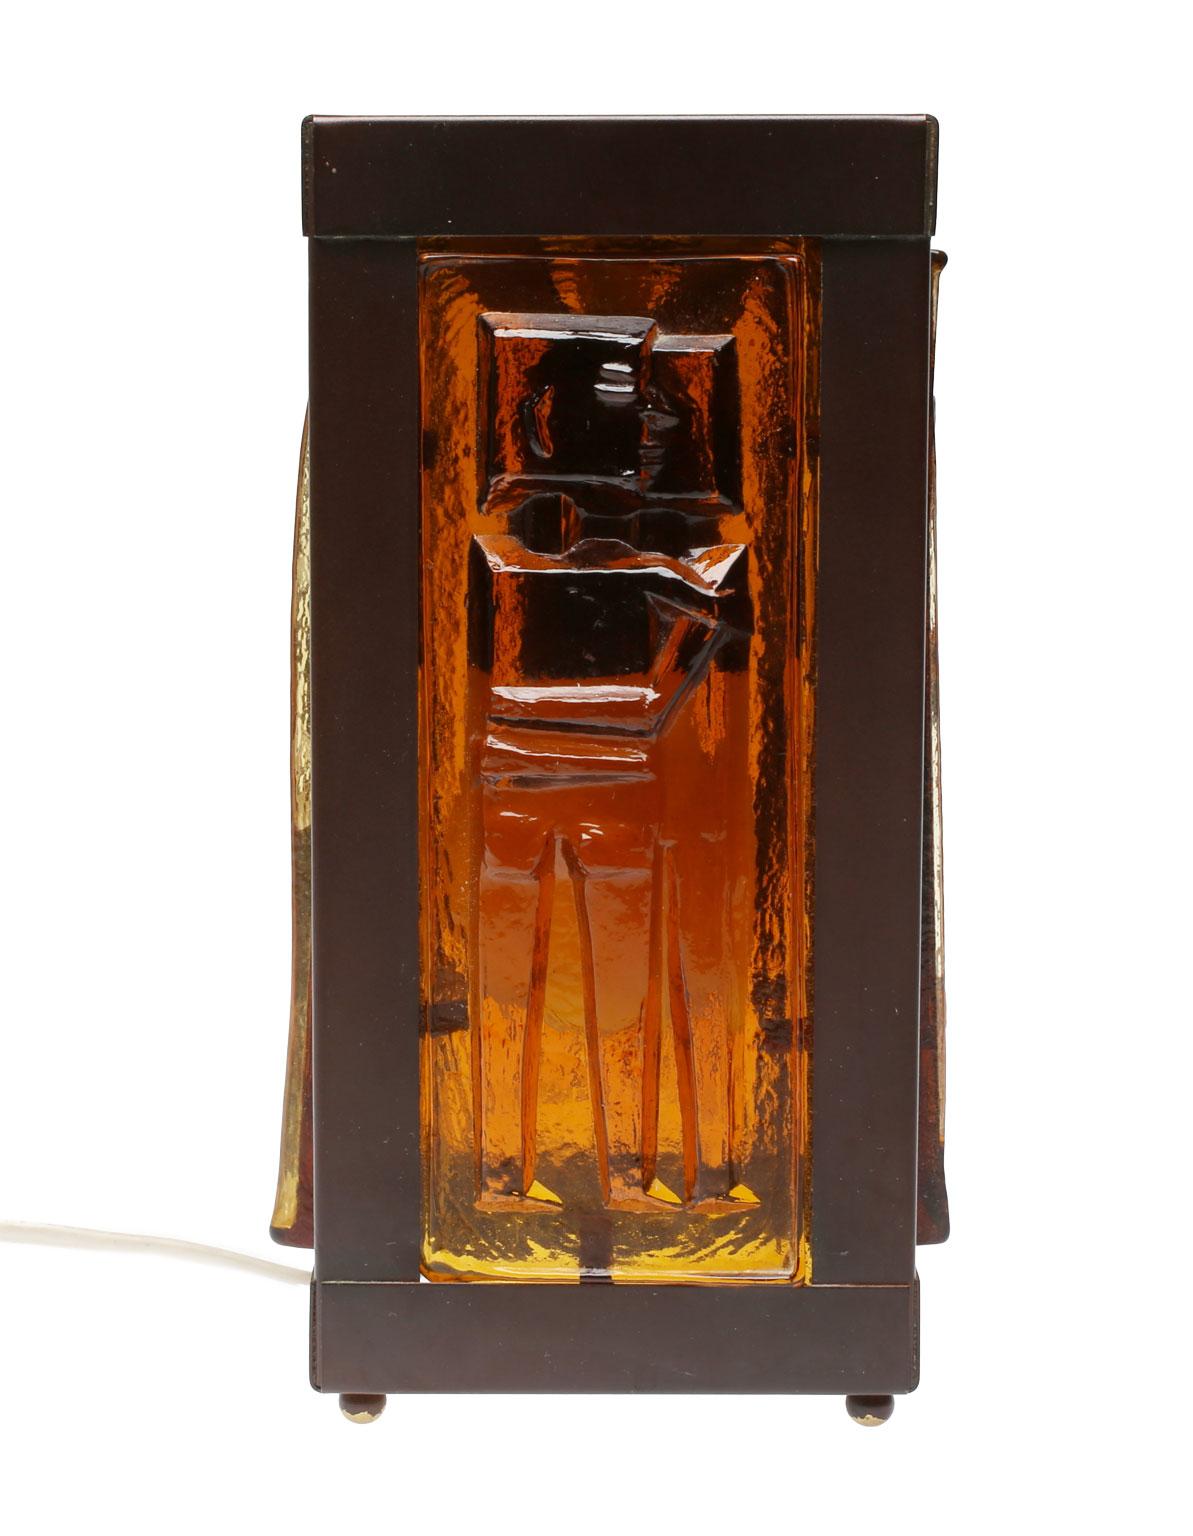 Swedish Scandinavian Rustic Colored Glass Table Lamp by Erik Höglund 1960s, Sweden